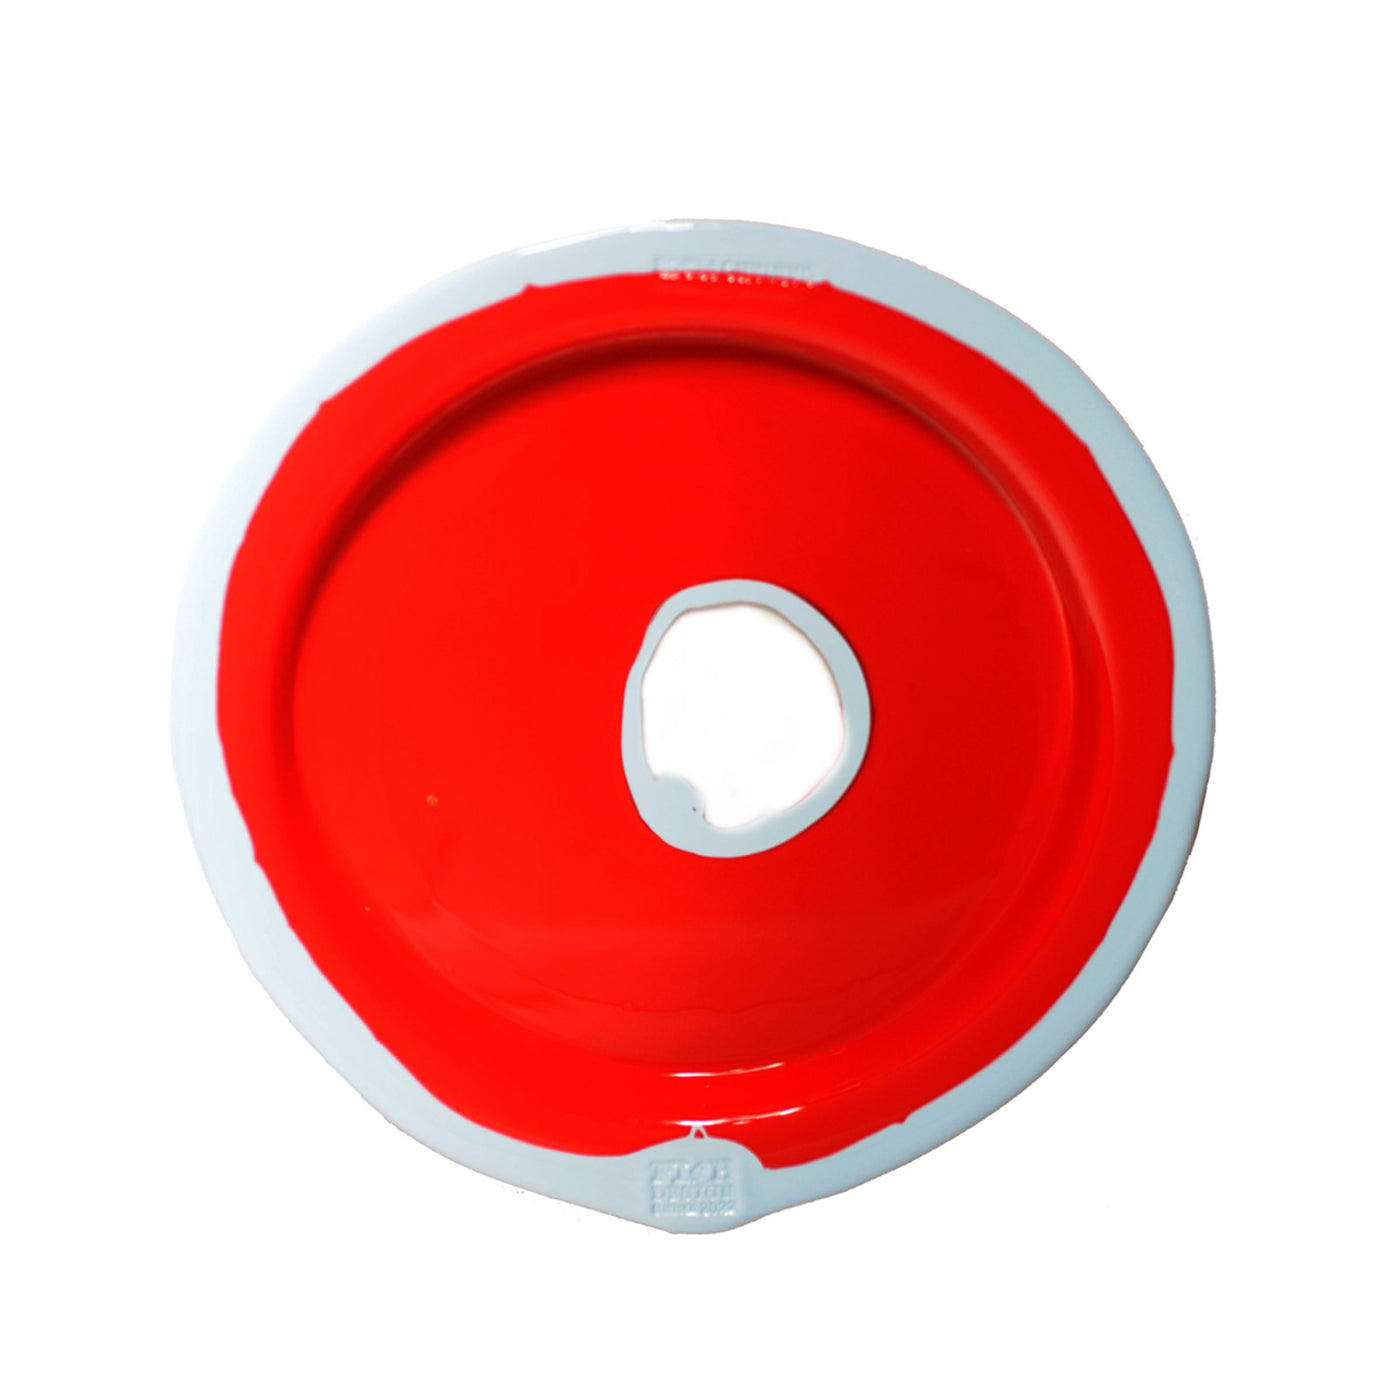 Resin Round Tray TRY-TRAY Red by Gaetano Pesce for Fish Design 02